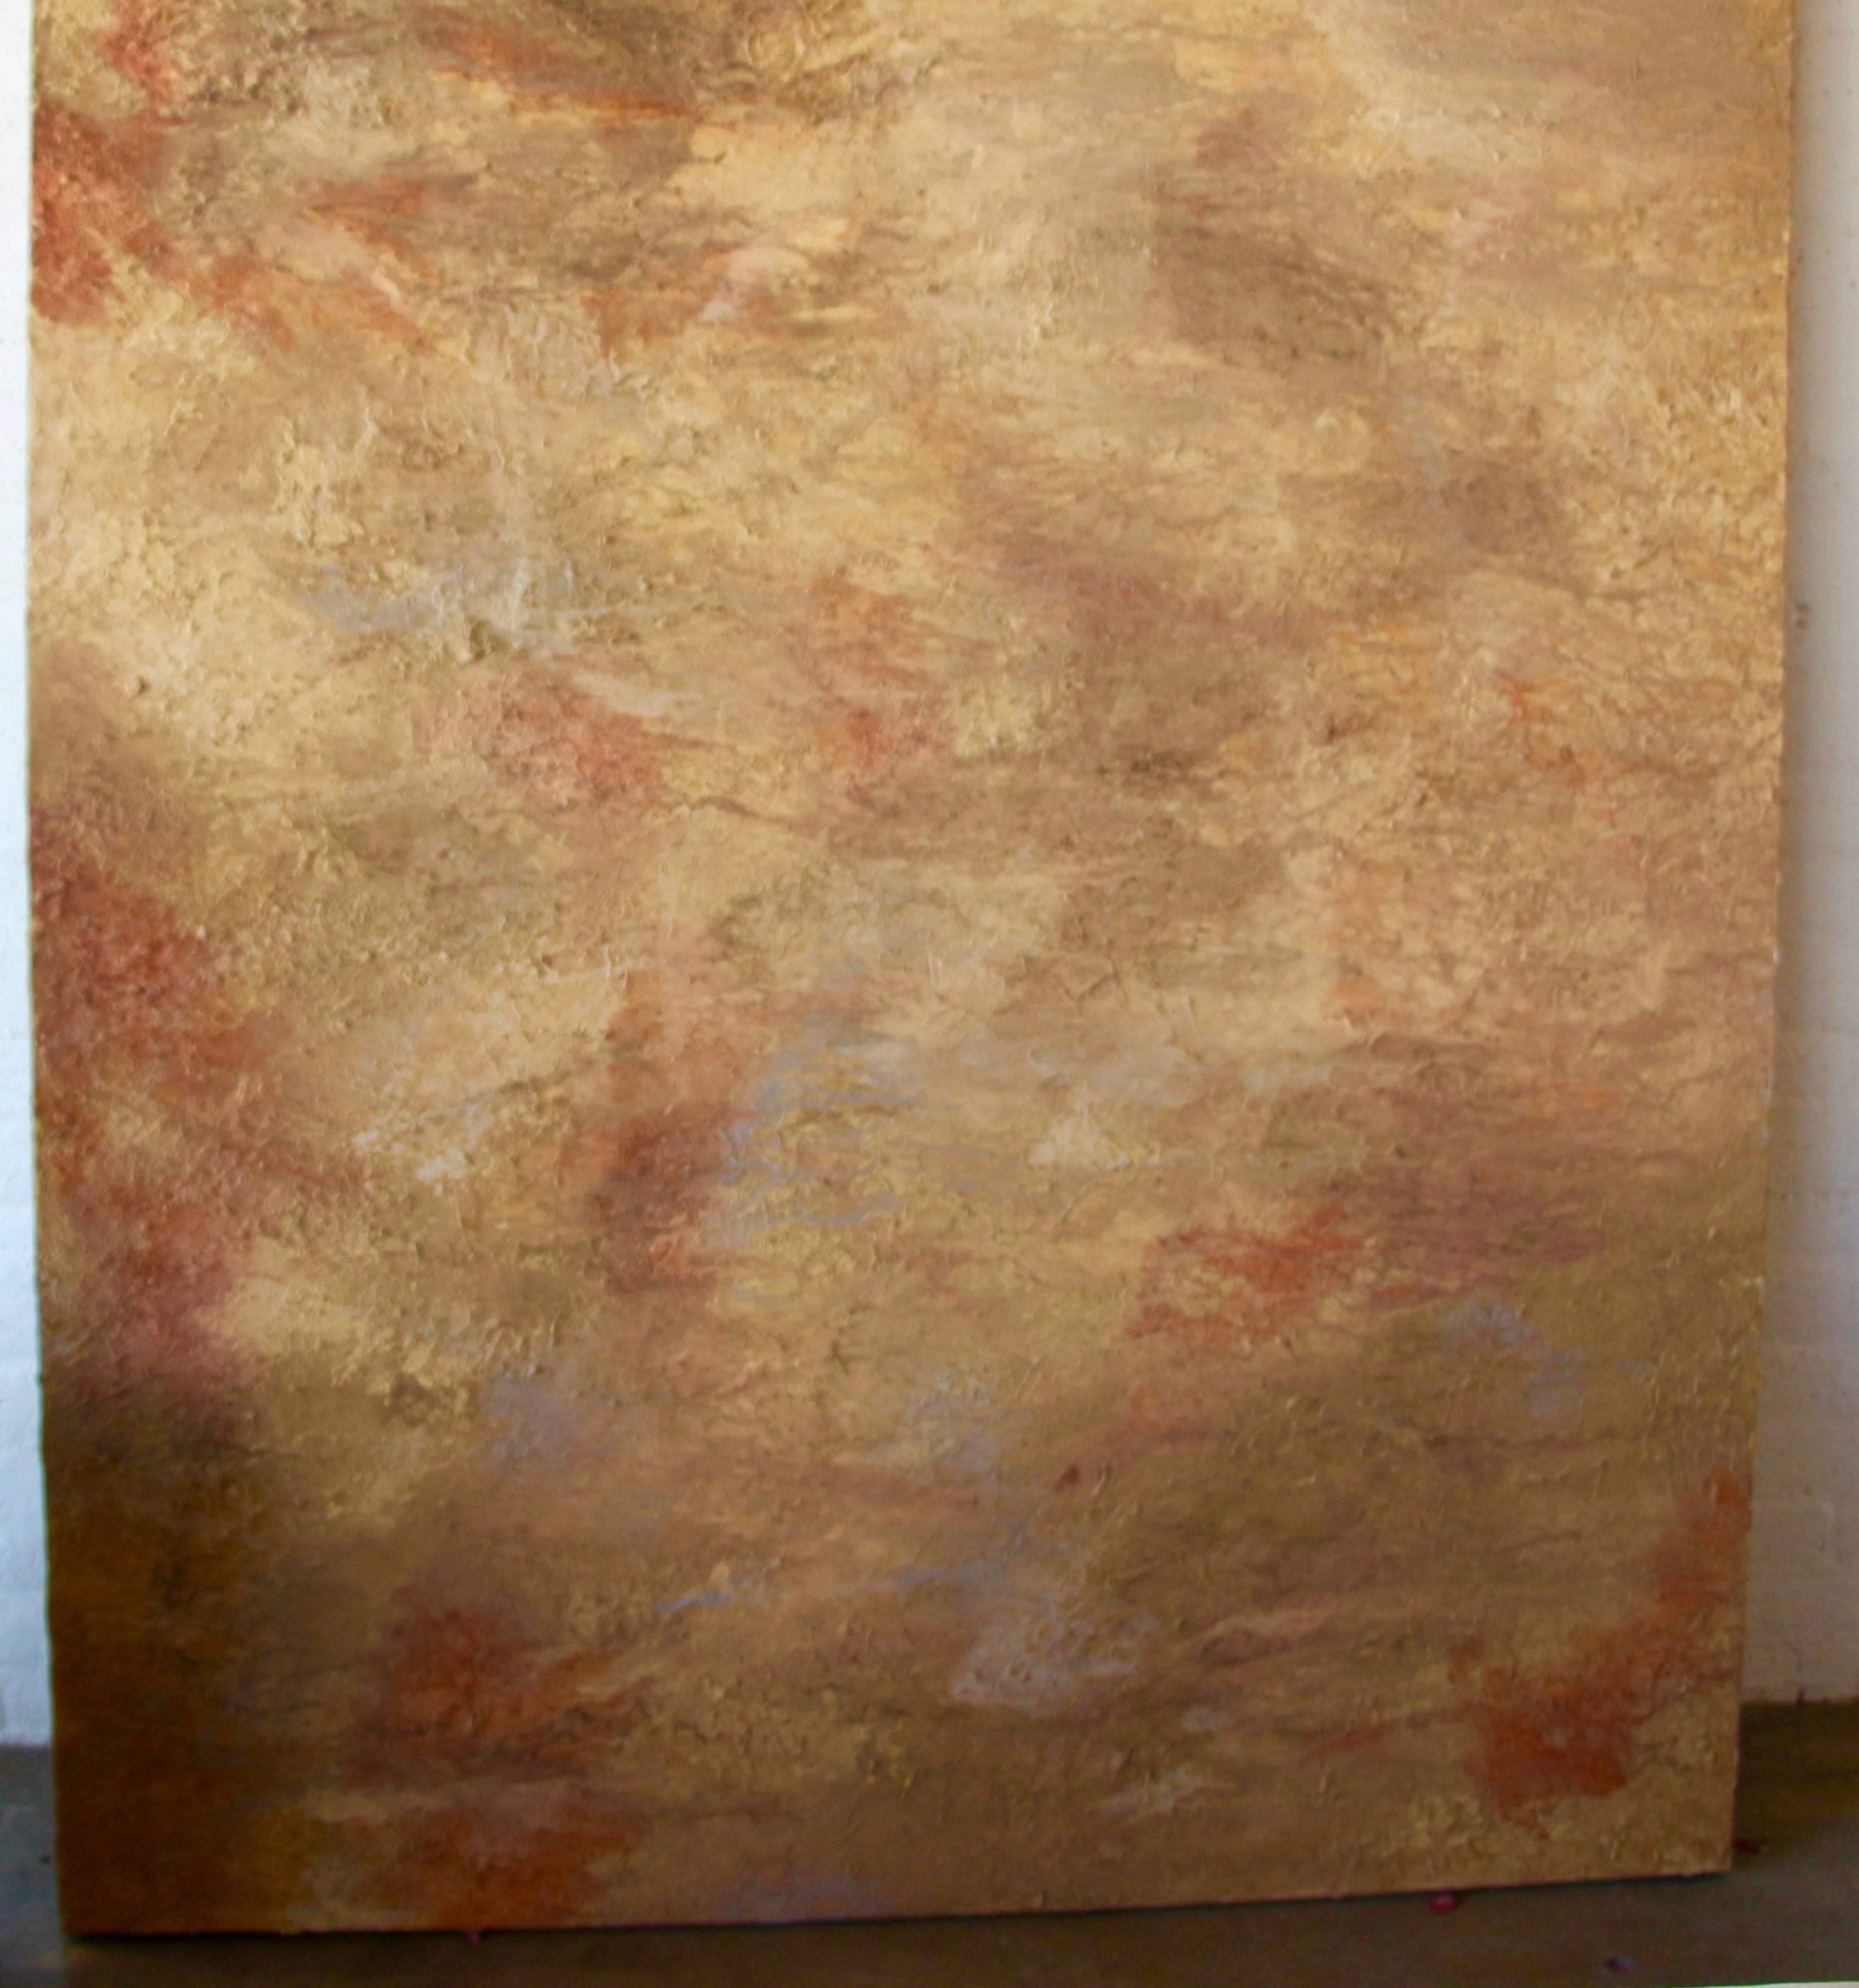 A large massive abstract with thick impasto paint. Beautiful tonal abstract. Please note the size of this piece, as it is quite large 9 feet tall and 6 feet wide. Unsigned. It can be hung vertically or horizontally.